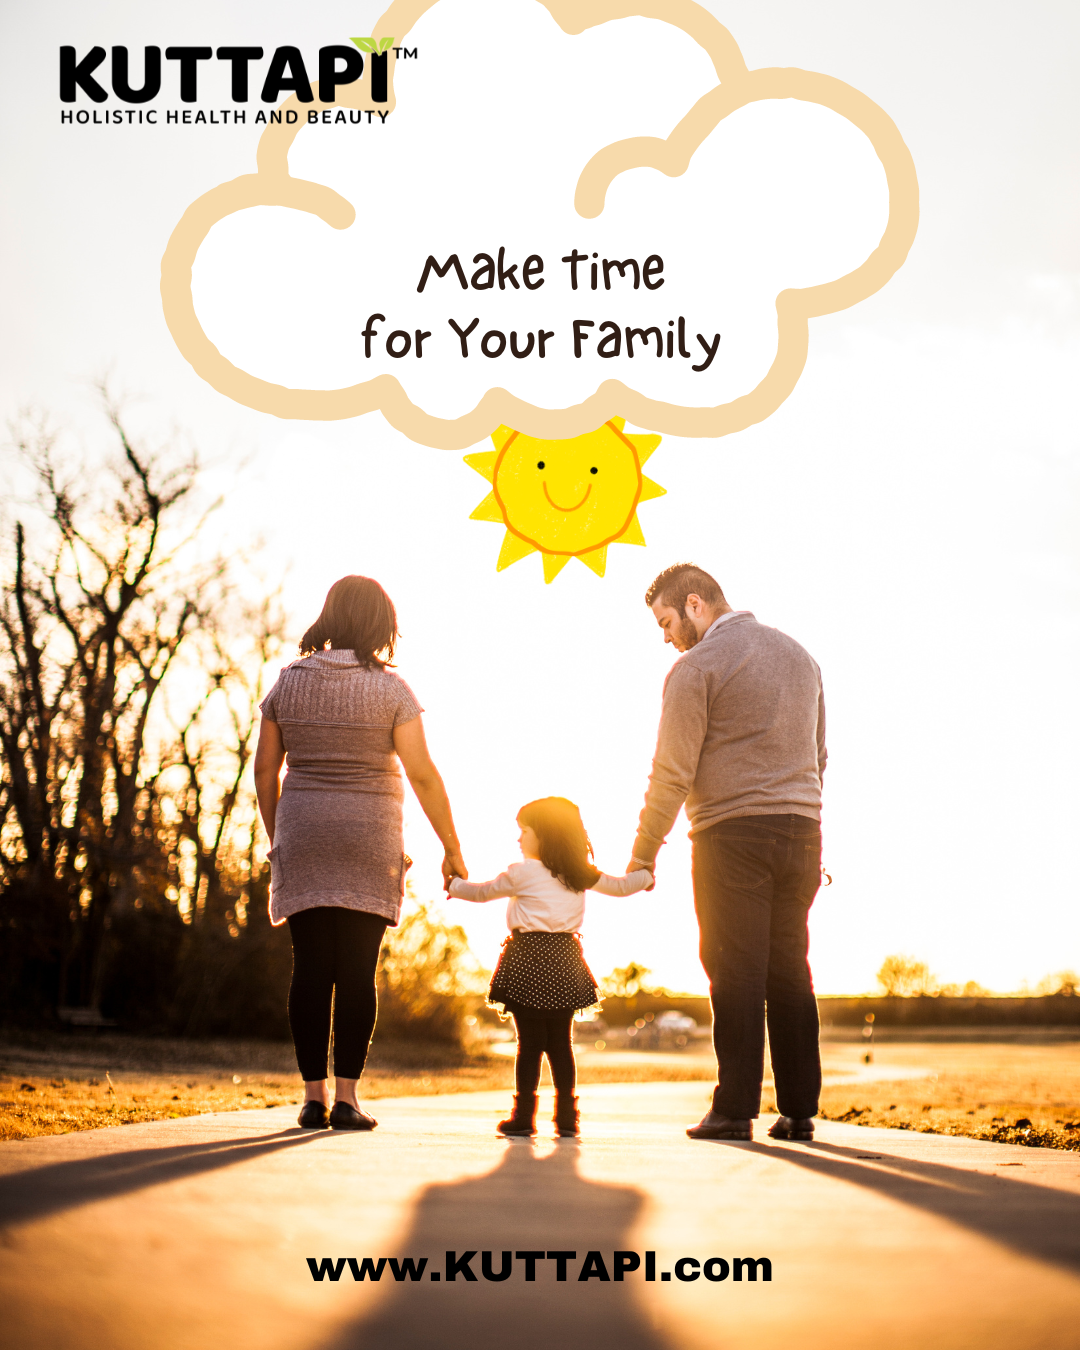 "Make Time For Your Family"